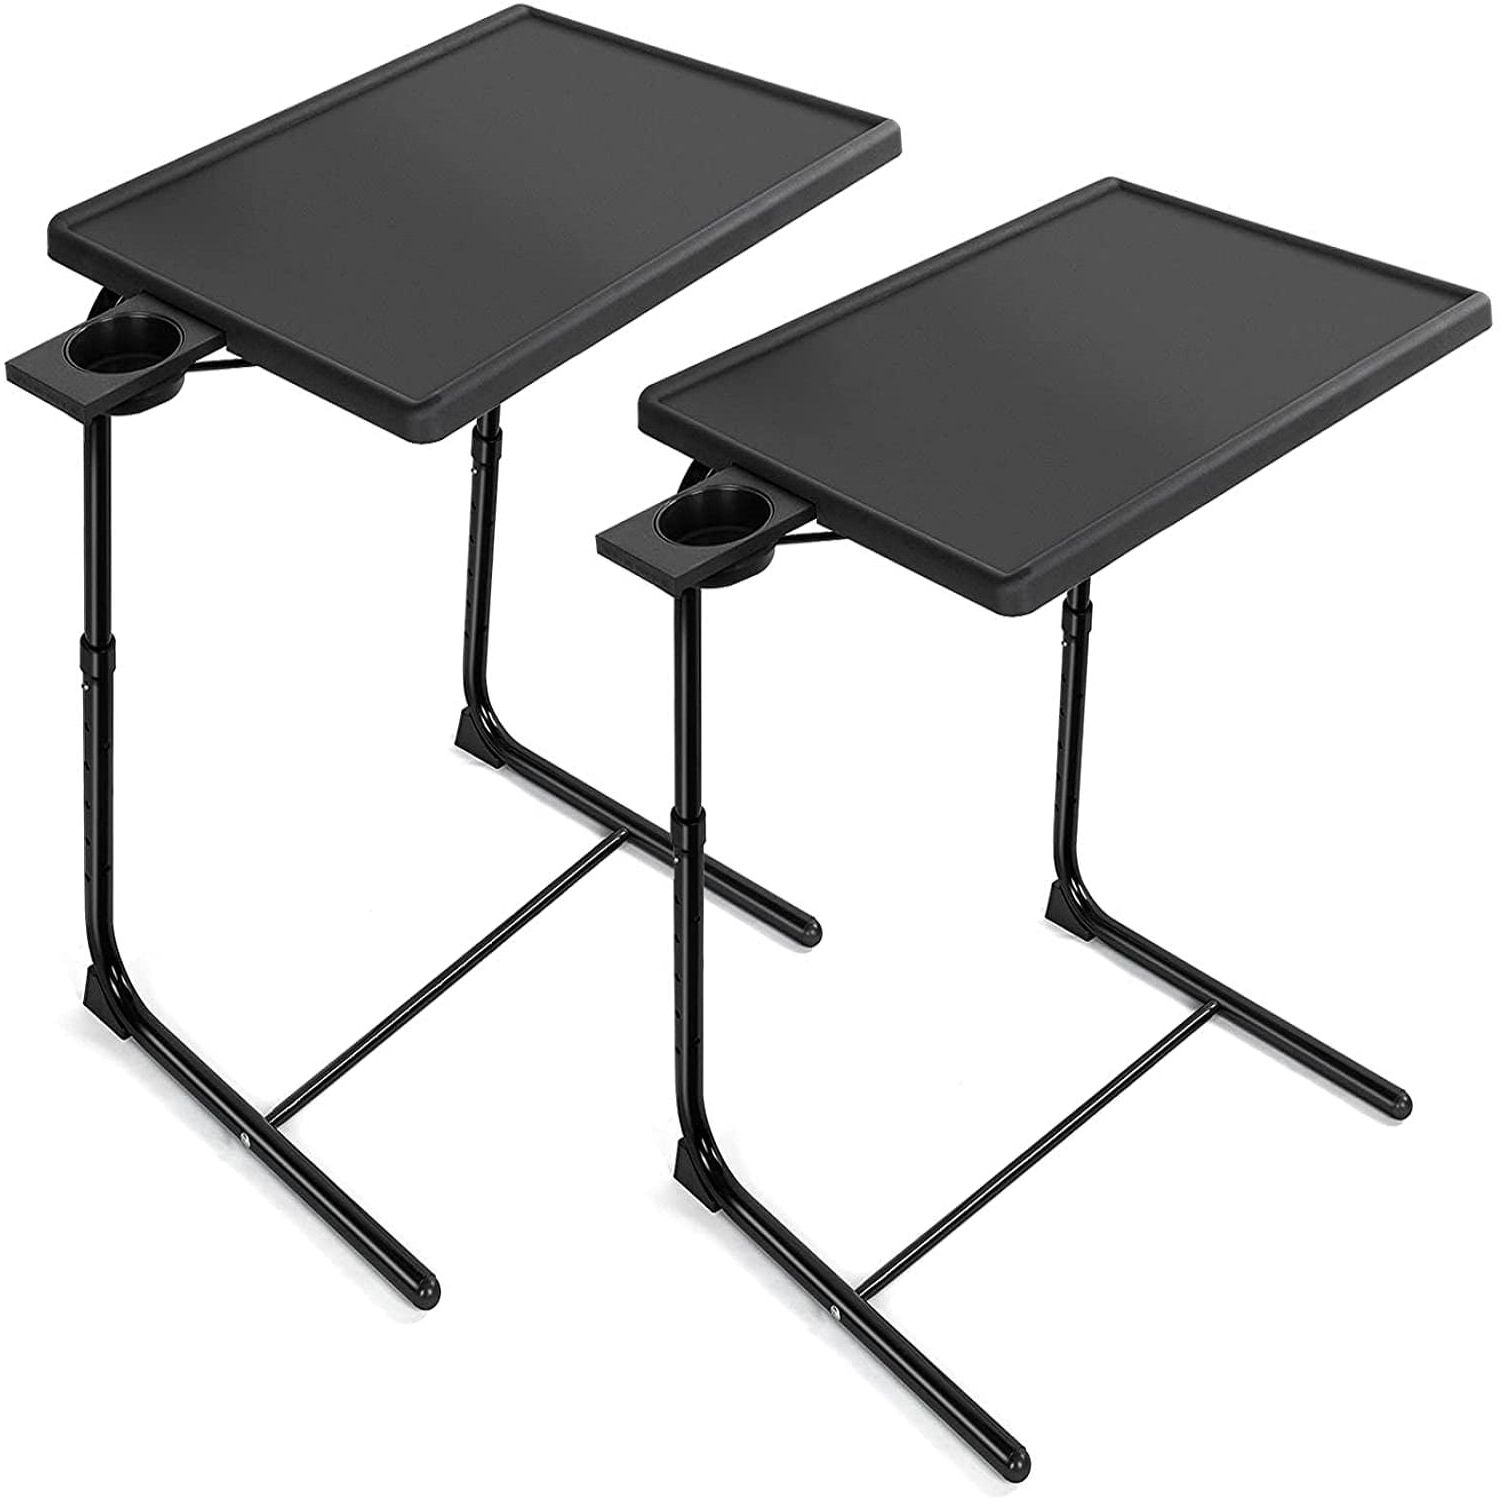 Favorite Buy 2 Pack Portable Foldable 6 Height & 3 Tilt Angles Adjustable Tv Throughout Foldable Portable Adjustable Tv Stands (View 4 of 15)